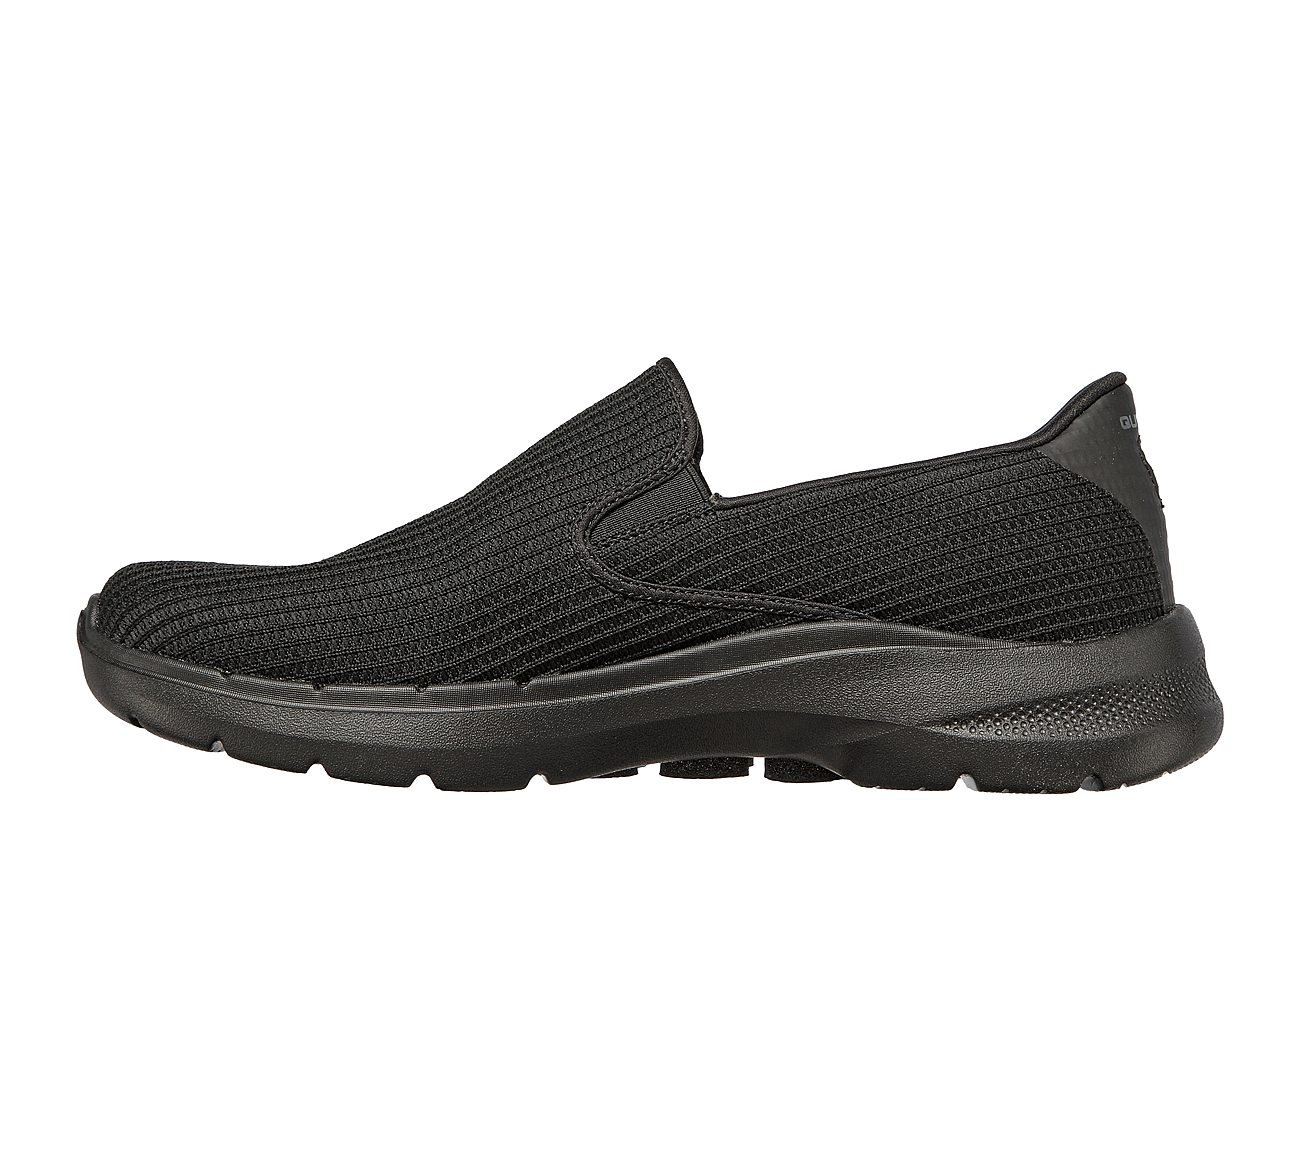 Skechers Black Go Walk 6 Anaglyph Mens Slip On Shoes Style ID: 216201 ...